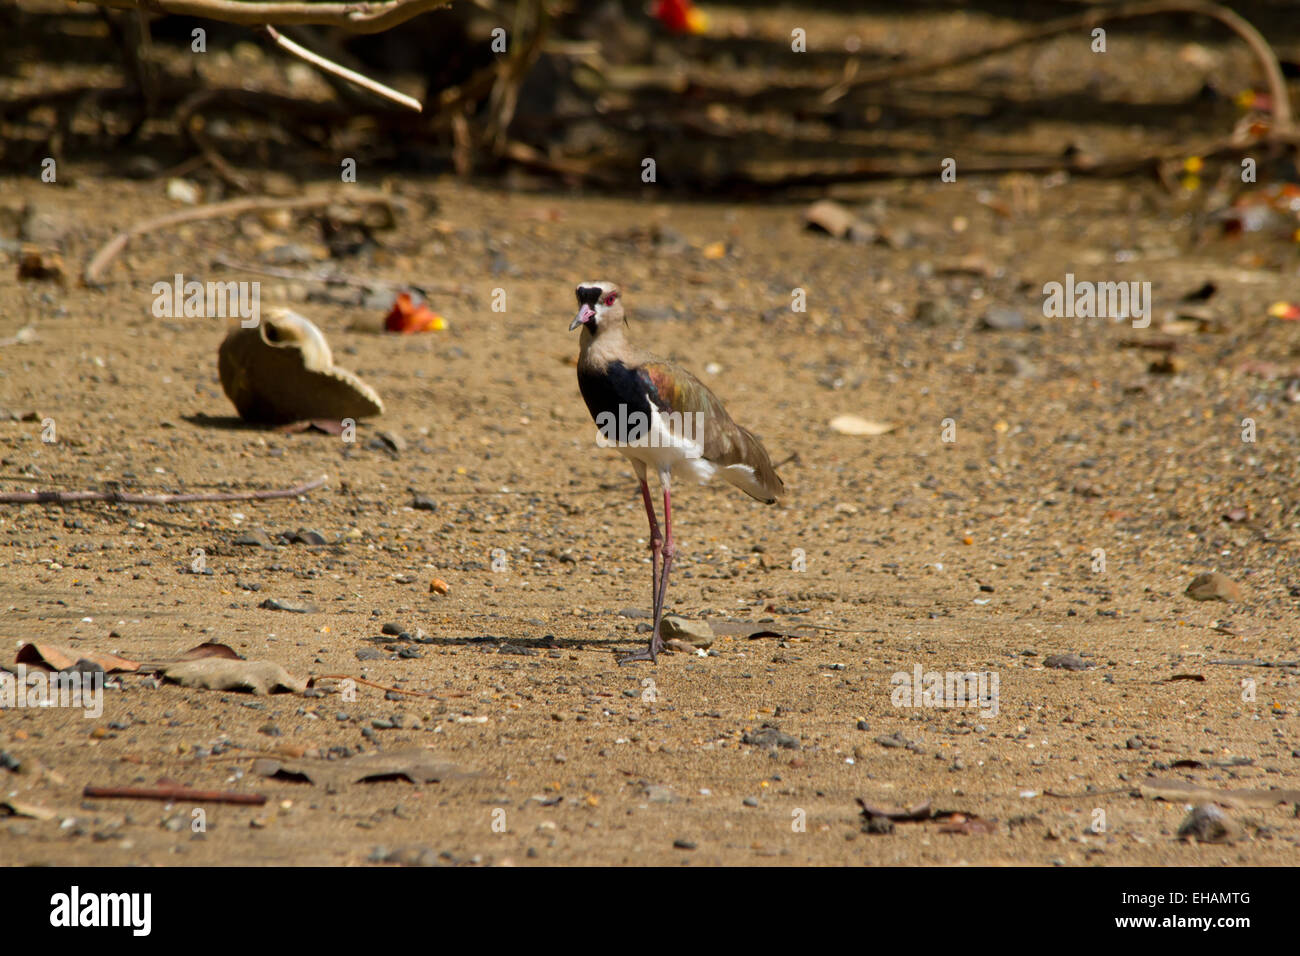 Southern Lapwing (Vanellus chilensis) standing on a lake shore Stock Photo